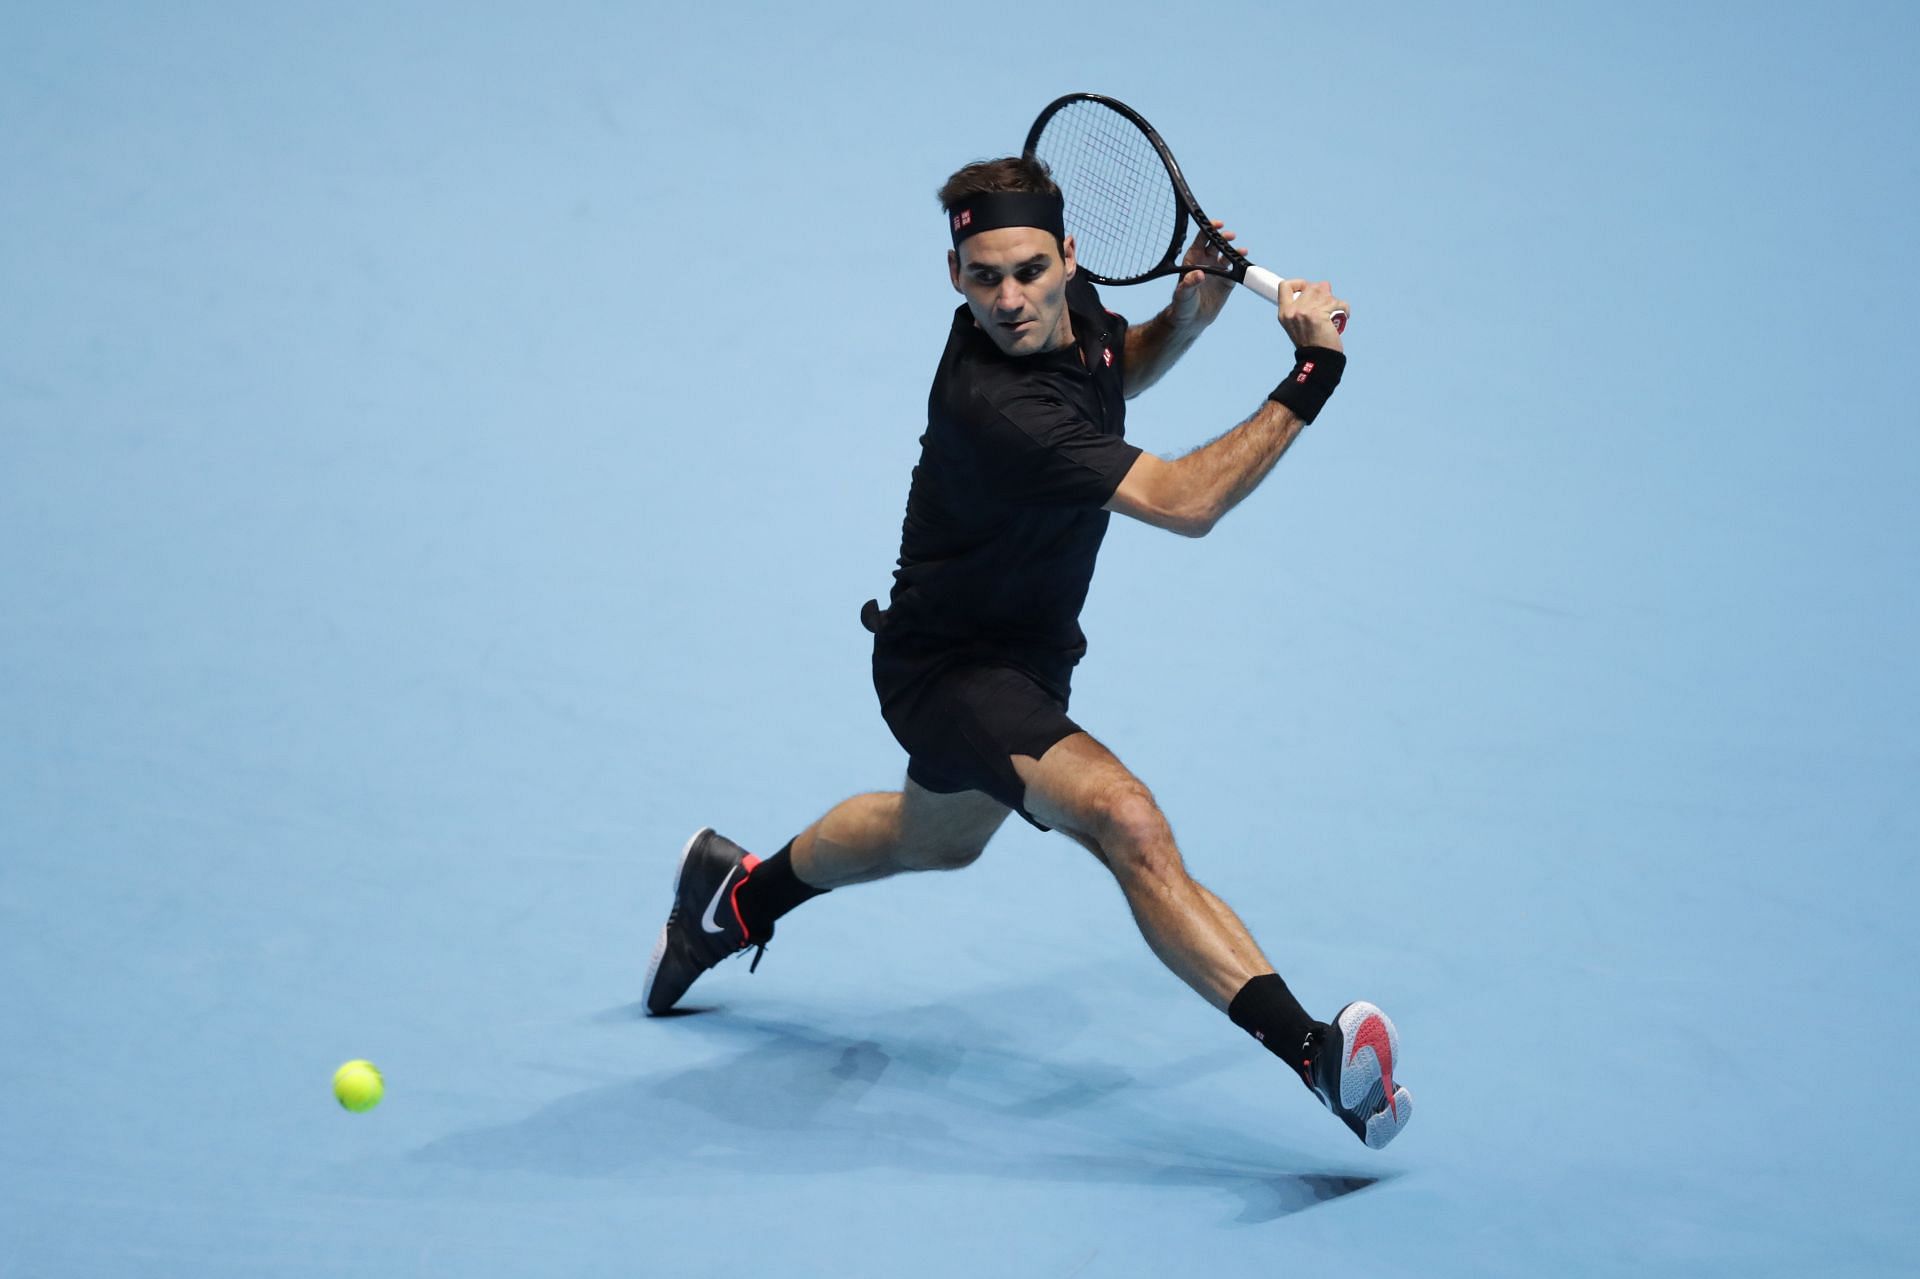 Roger Federer has 59 match wins at the Nitto ATP Finals